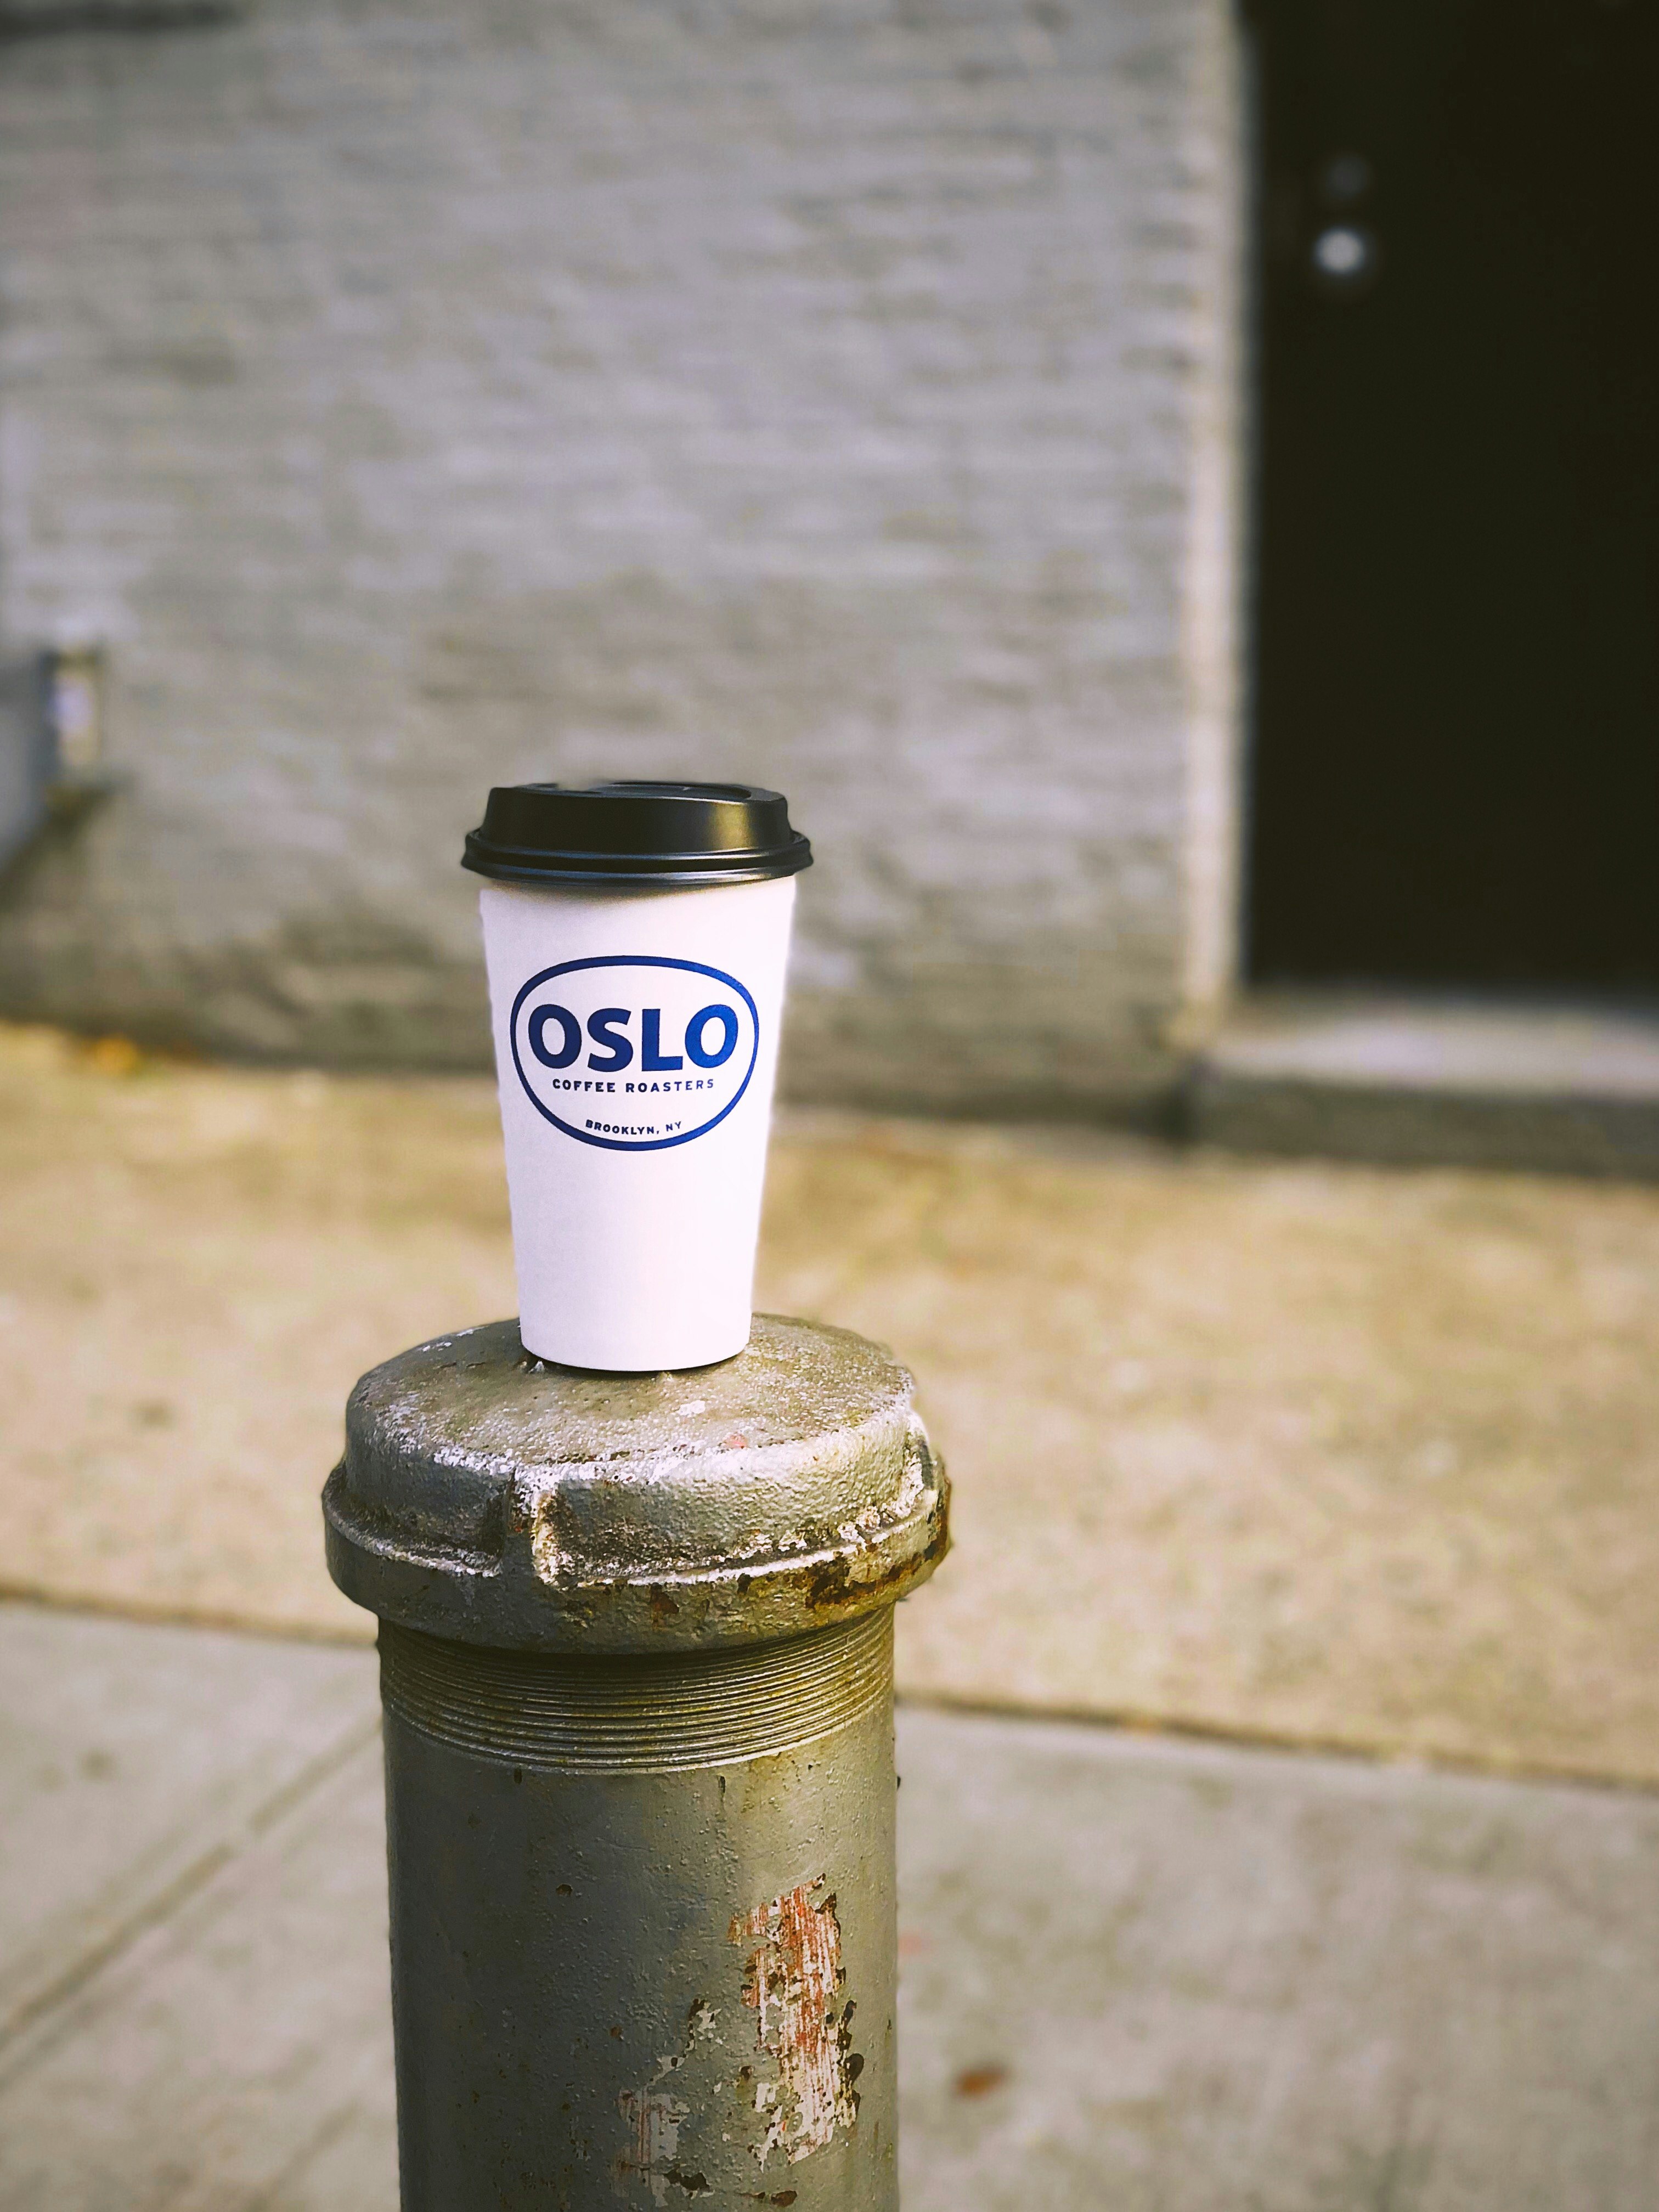 Oslo disposable cup on post near door